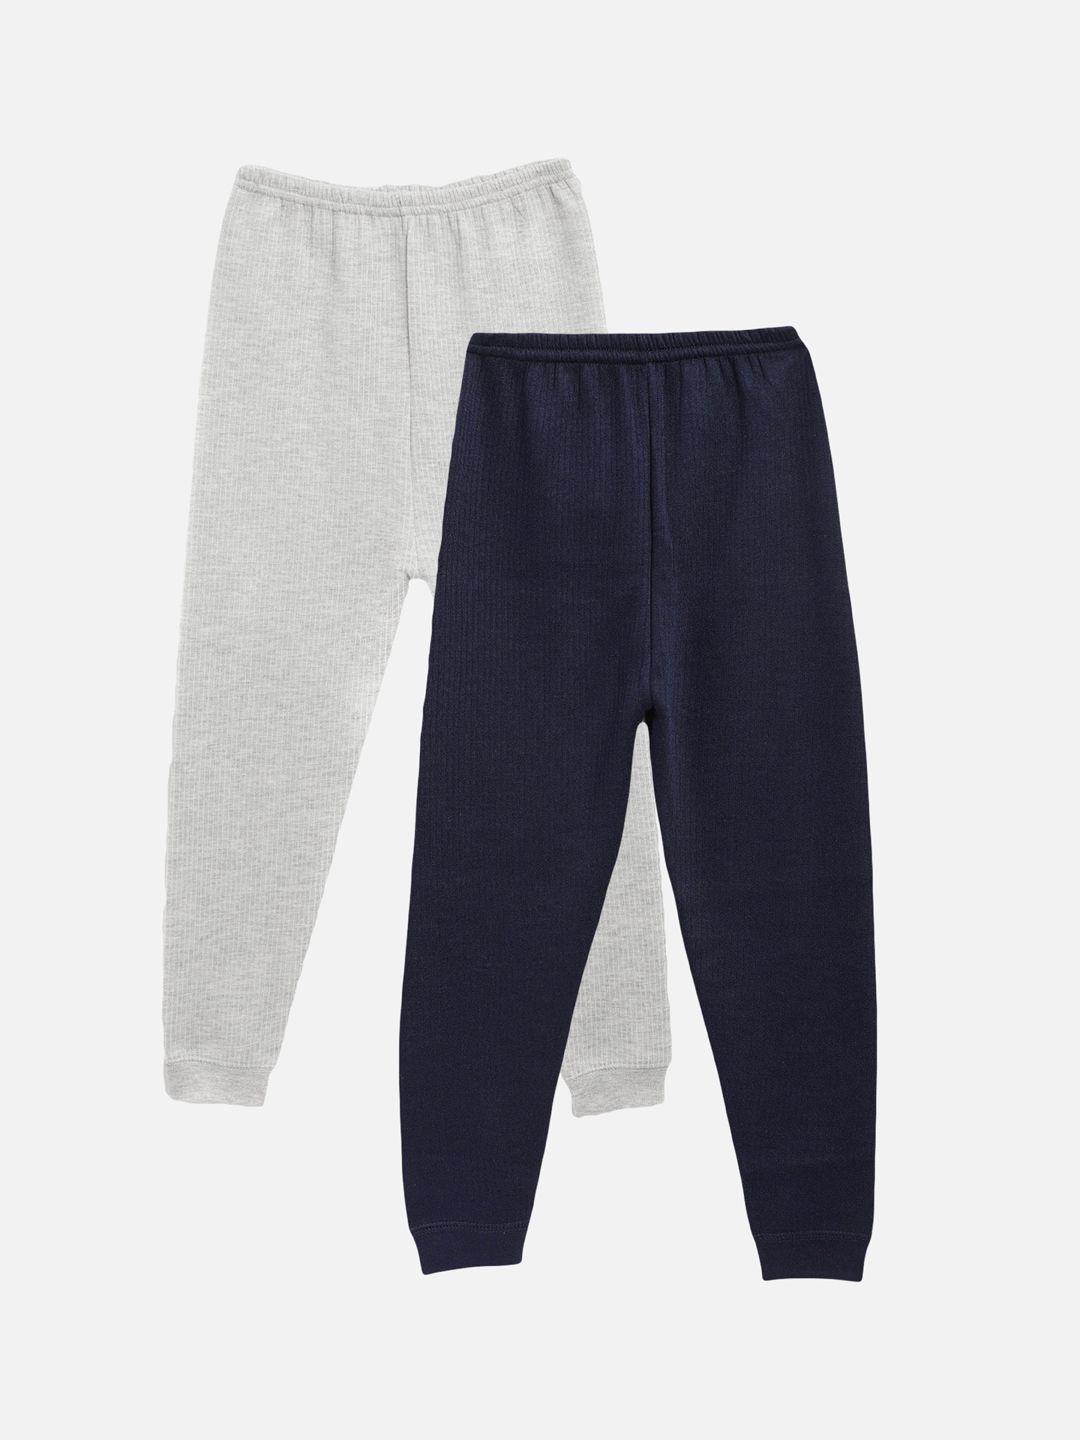 kanvin boys pack of 2 grey & navy blue solid thermal bottoms